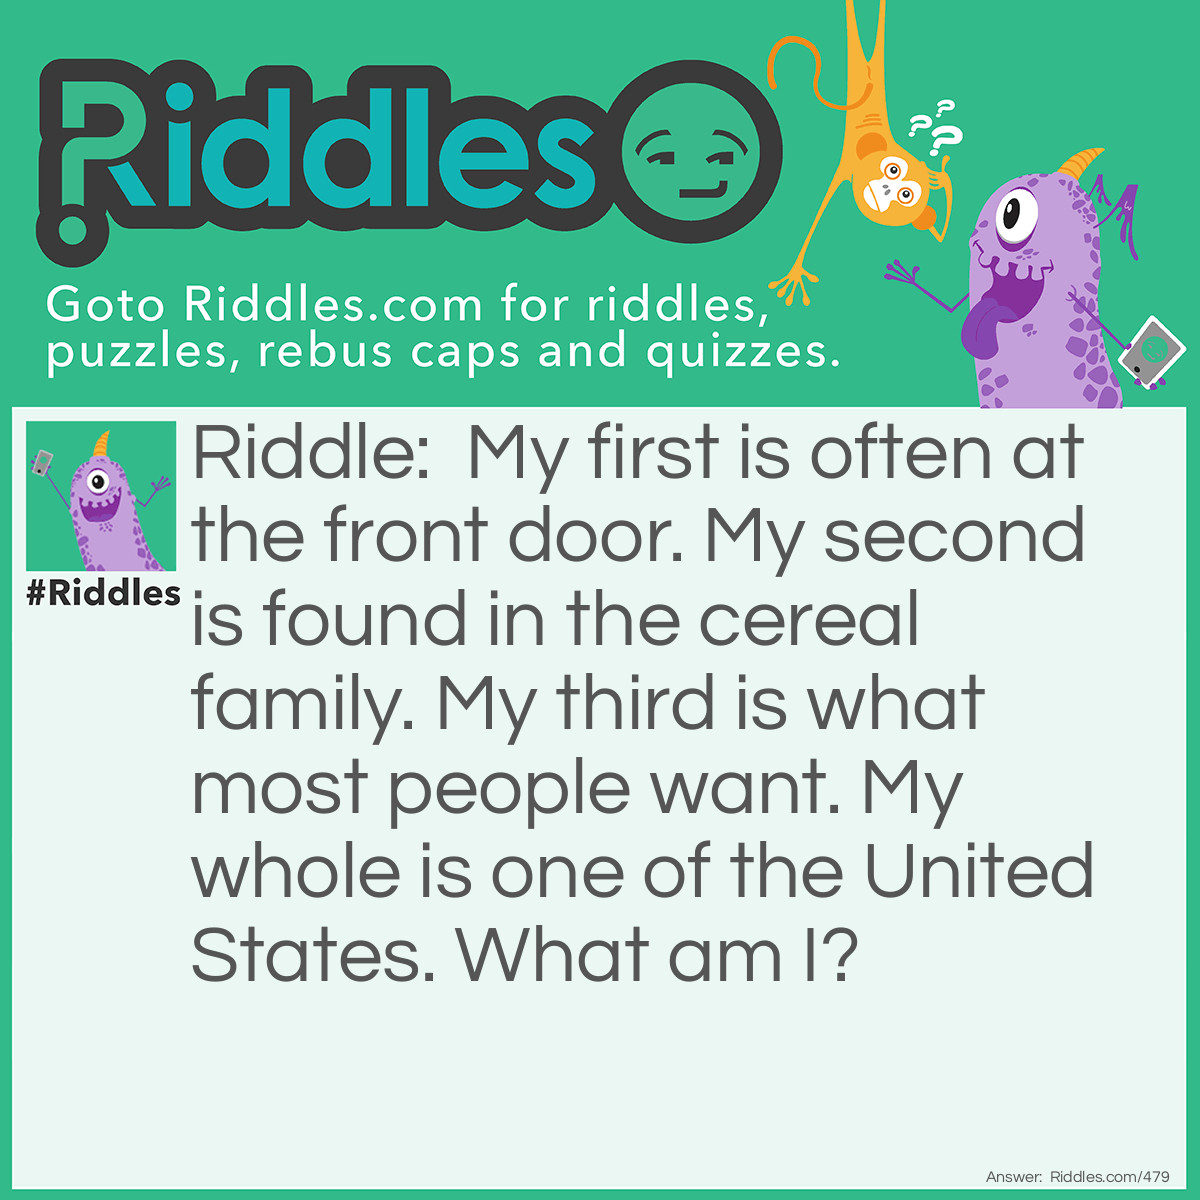 Riddle: My first is often at the front door. My second is found in the cereal family. My third is what most people want. My whole is one of the United States. What am I? Answer: Matrimoney. (mat + rye + money). Matrimony is certainly a "united state"!